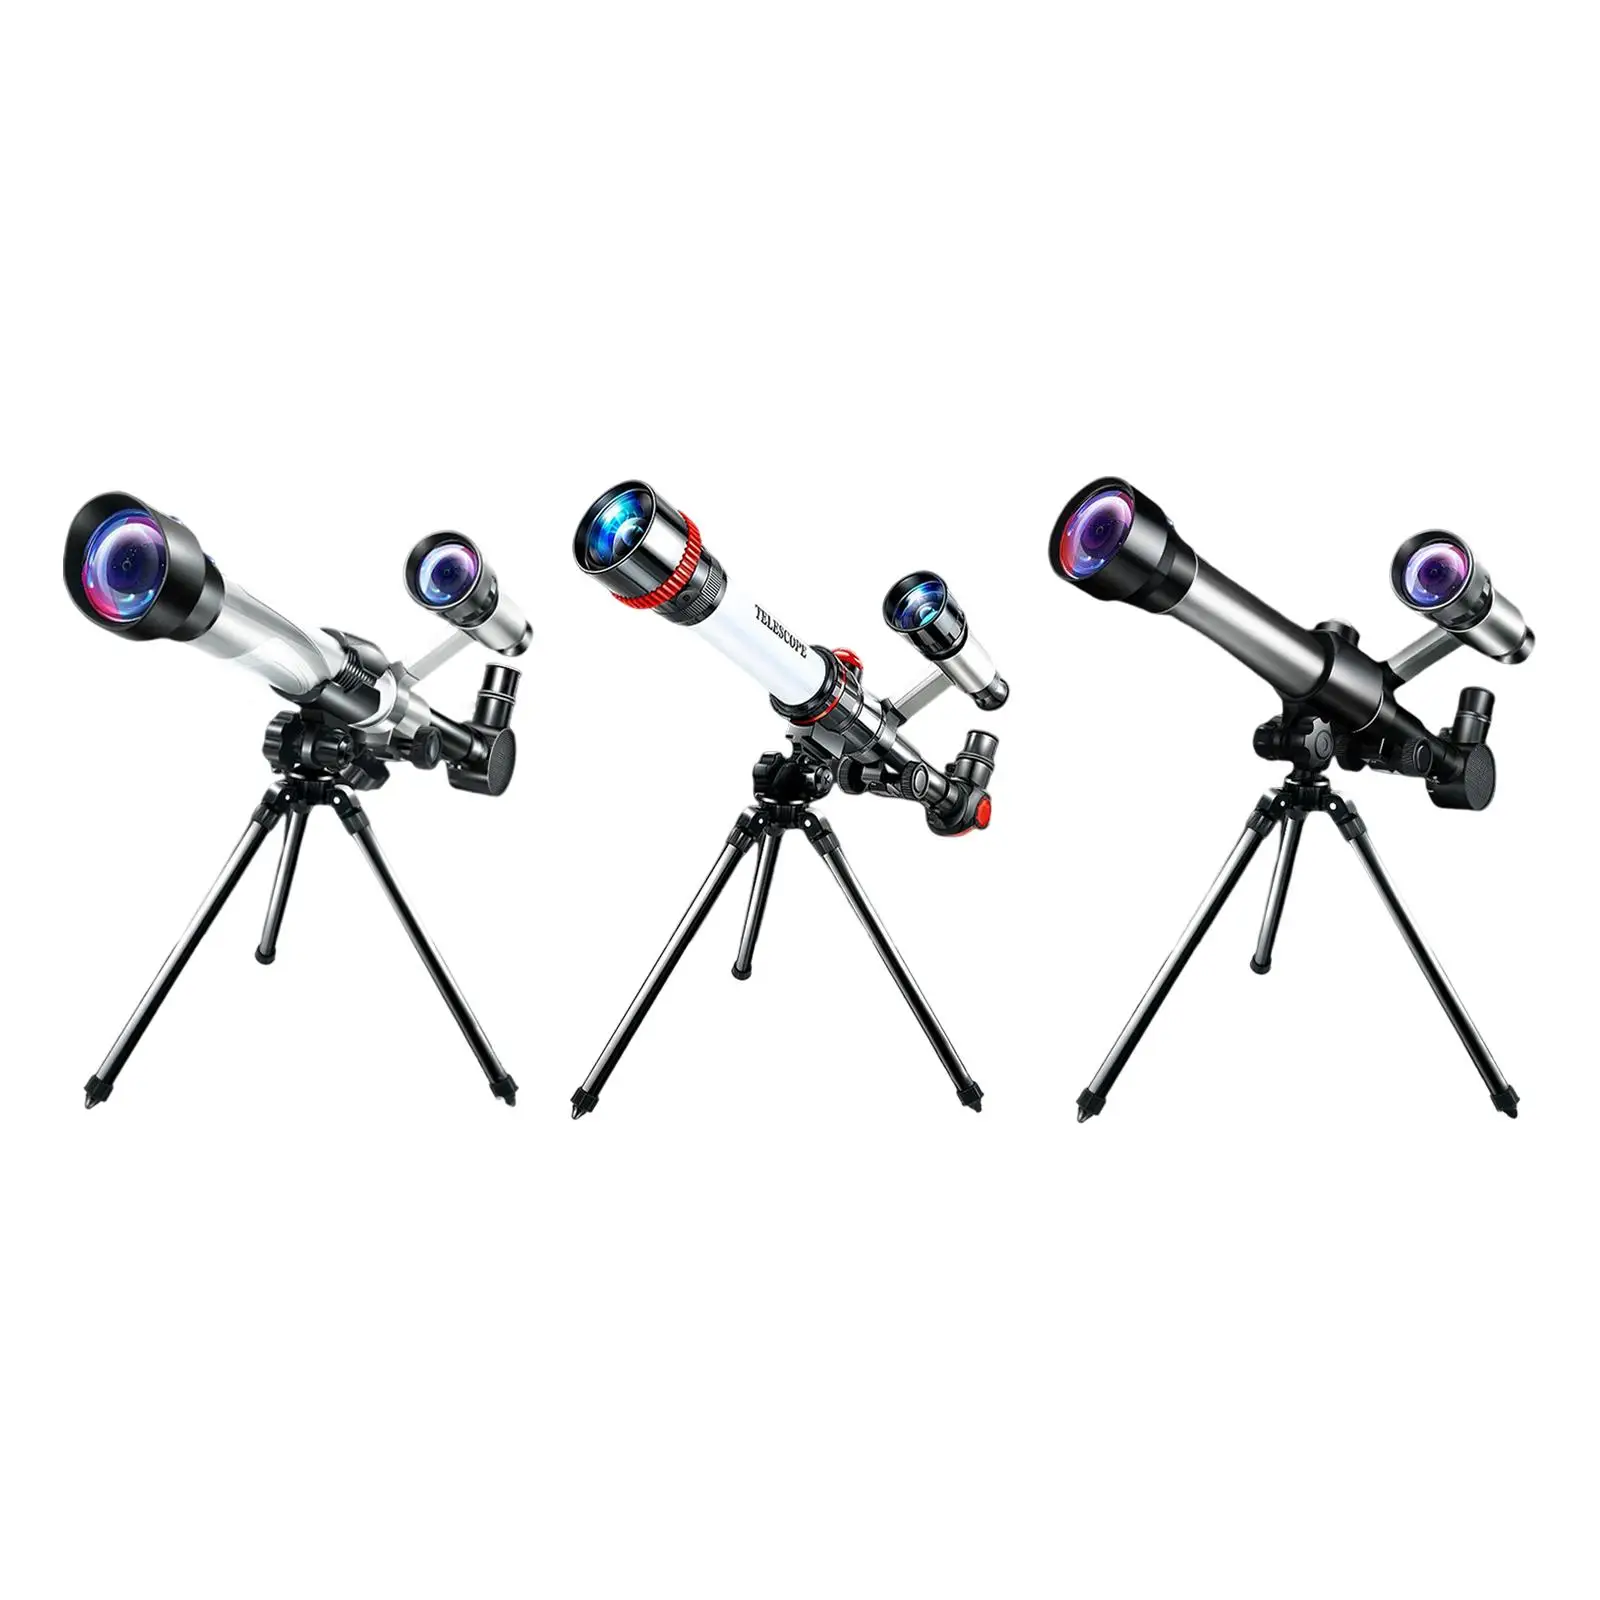 Portable 60mm Caliber Telescope with Finder Scope Tripod for Kids Fully Multi Coated Optics Panning Handle Durable Accessories